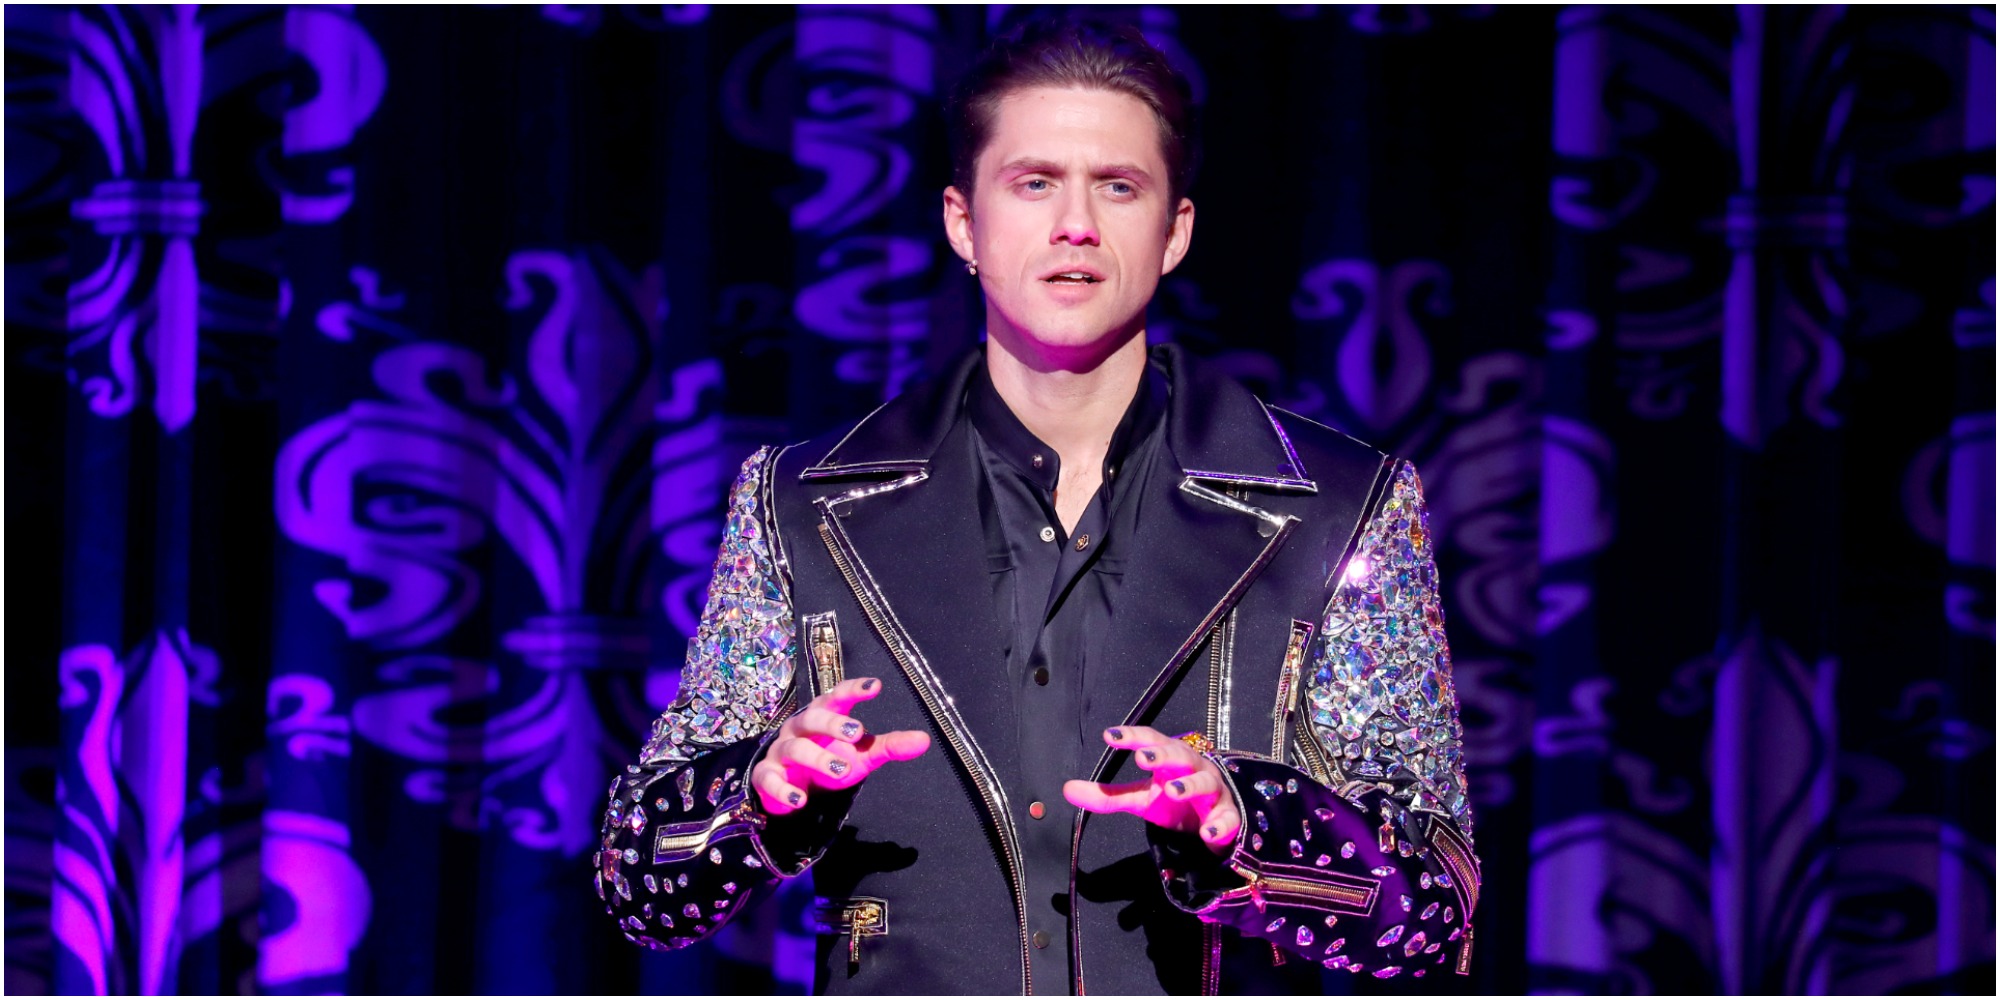 Aaron Tveit plays the role of poet Christian in Broadway's "Moulin Rouge! The Musical" a role where for which he was the given the sole nomination in his category.